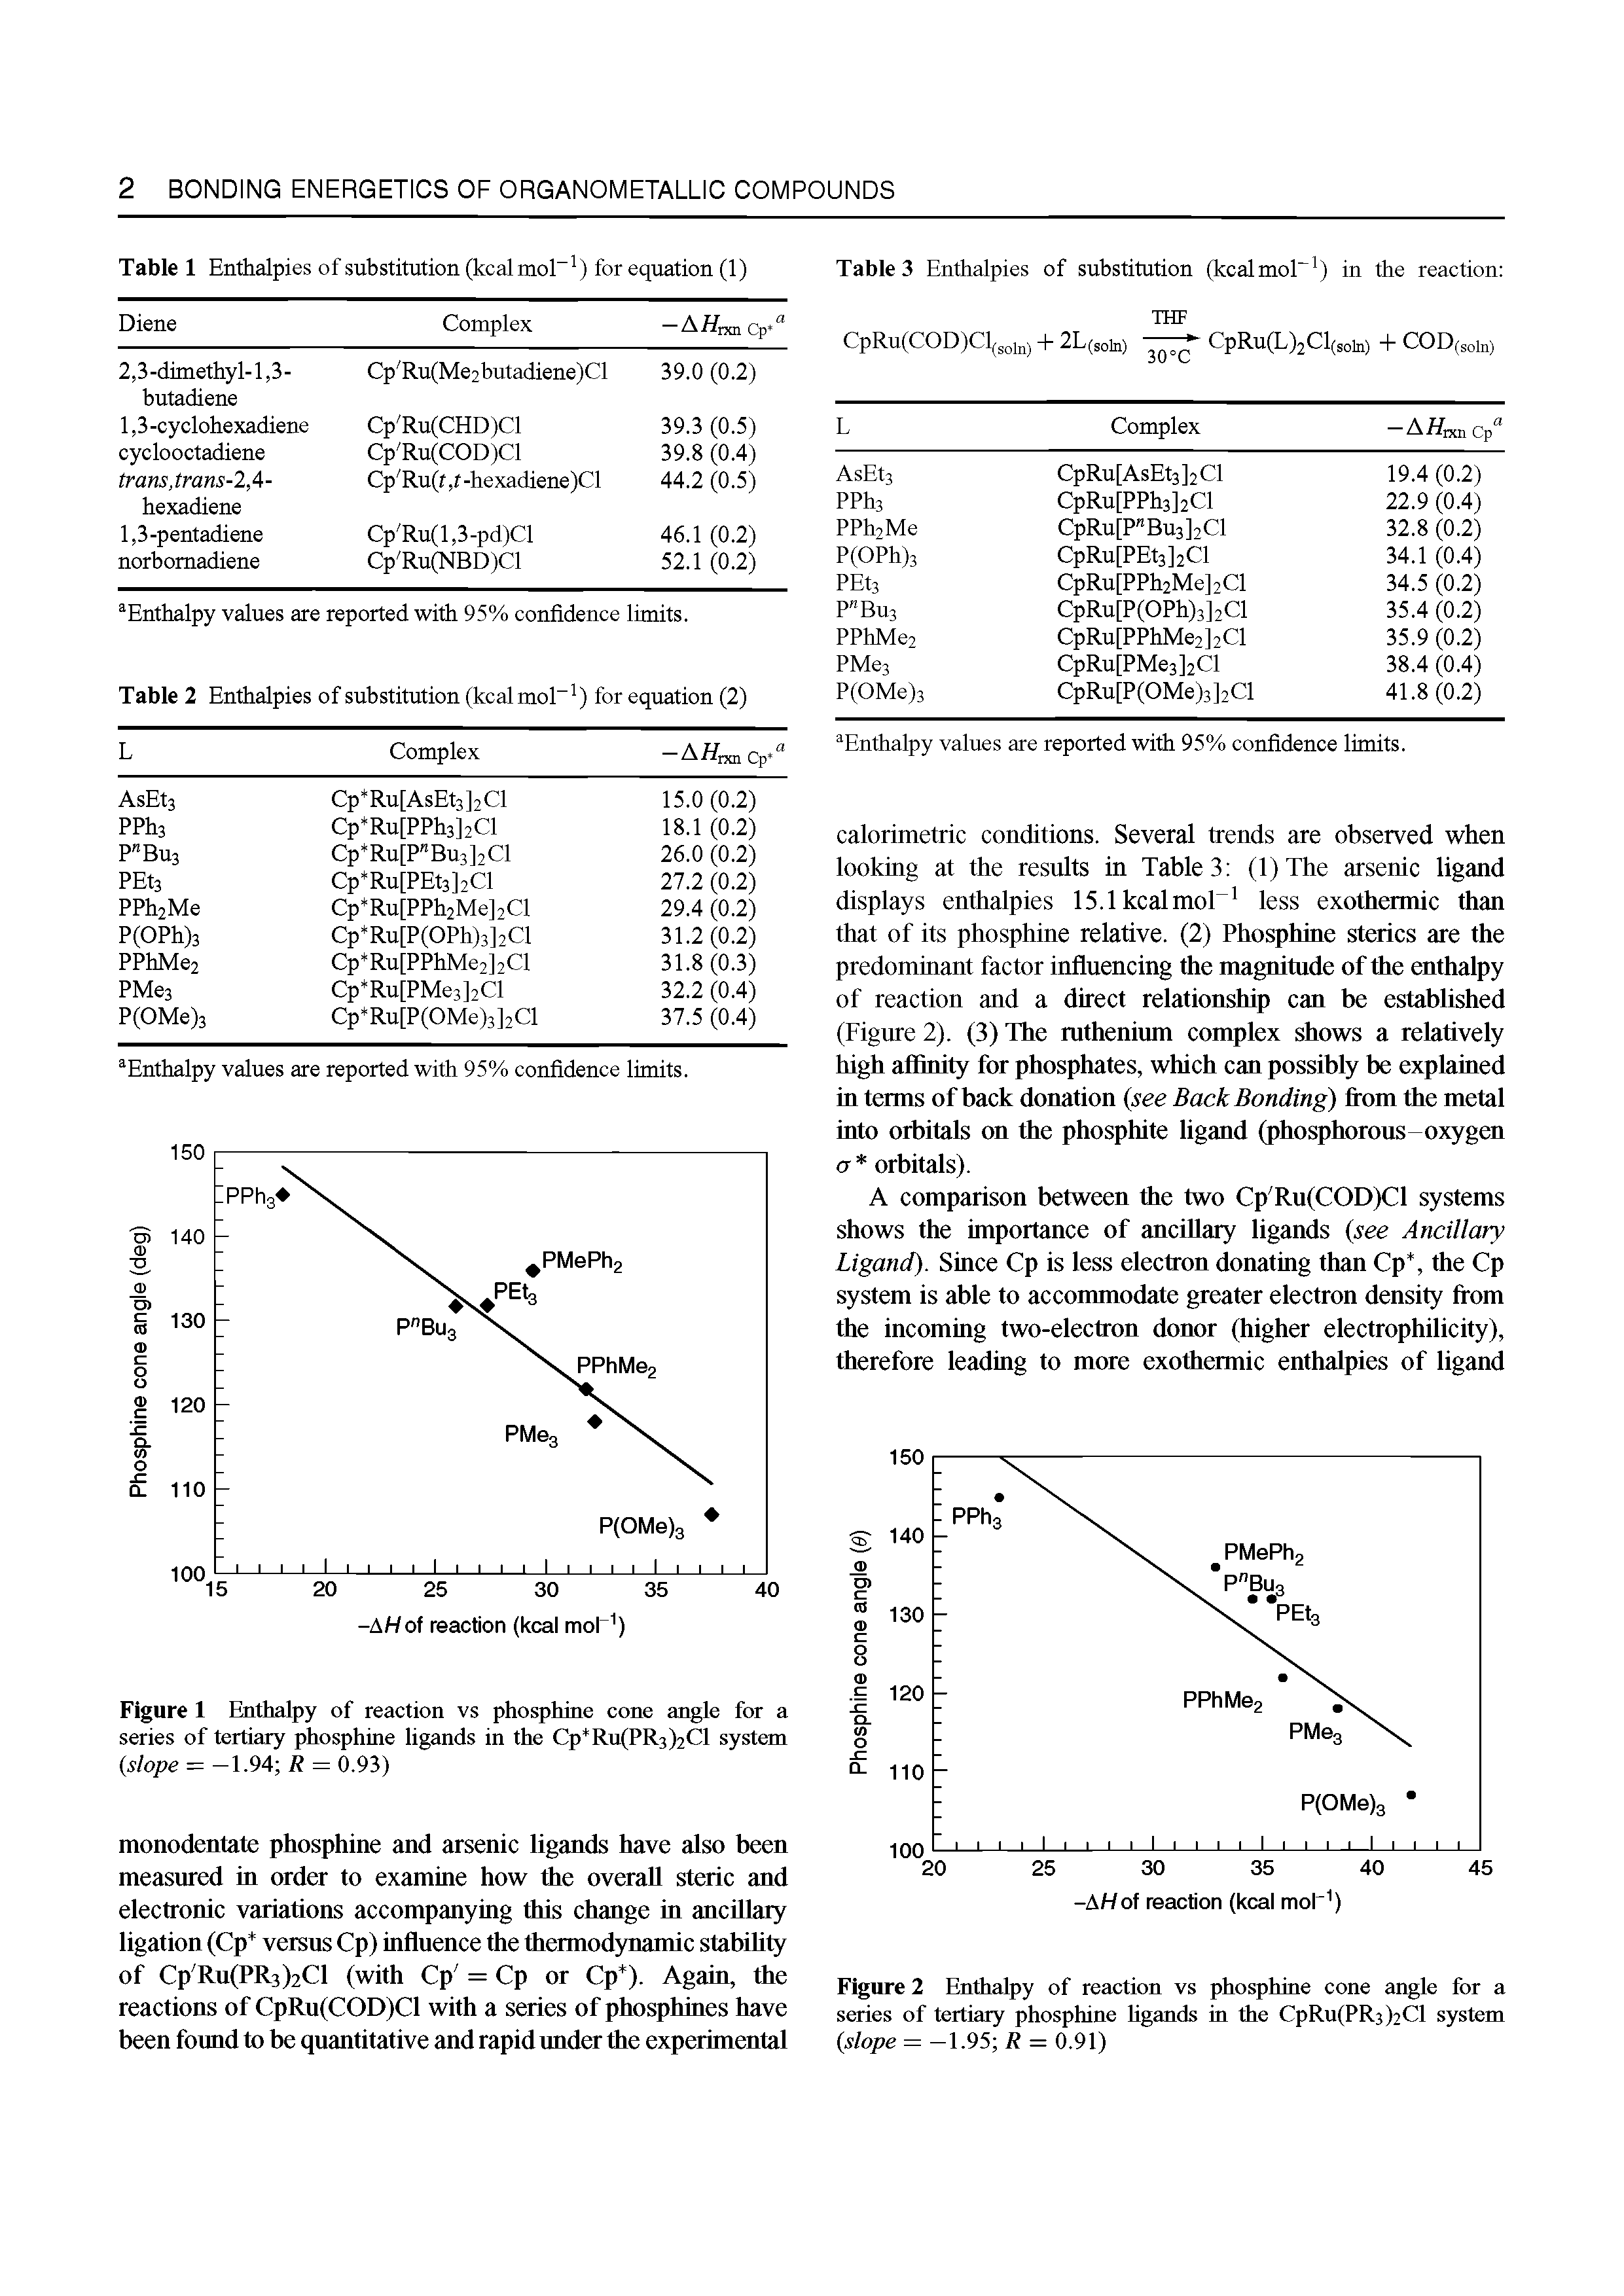 Figure 1 Enthalpy of reaction vs phosphine cone angle for a series of tertiary phosphine ligands in the Cp Ru(PR3)2Cl system (r/qpe =-1.94 R = 0.93)...